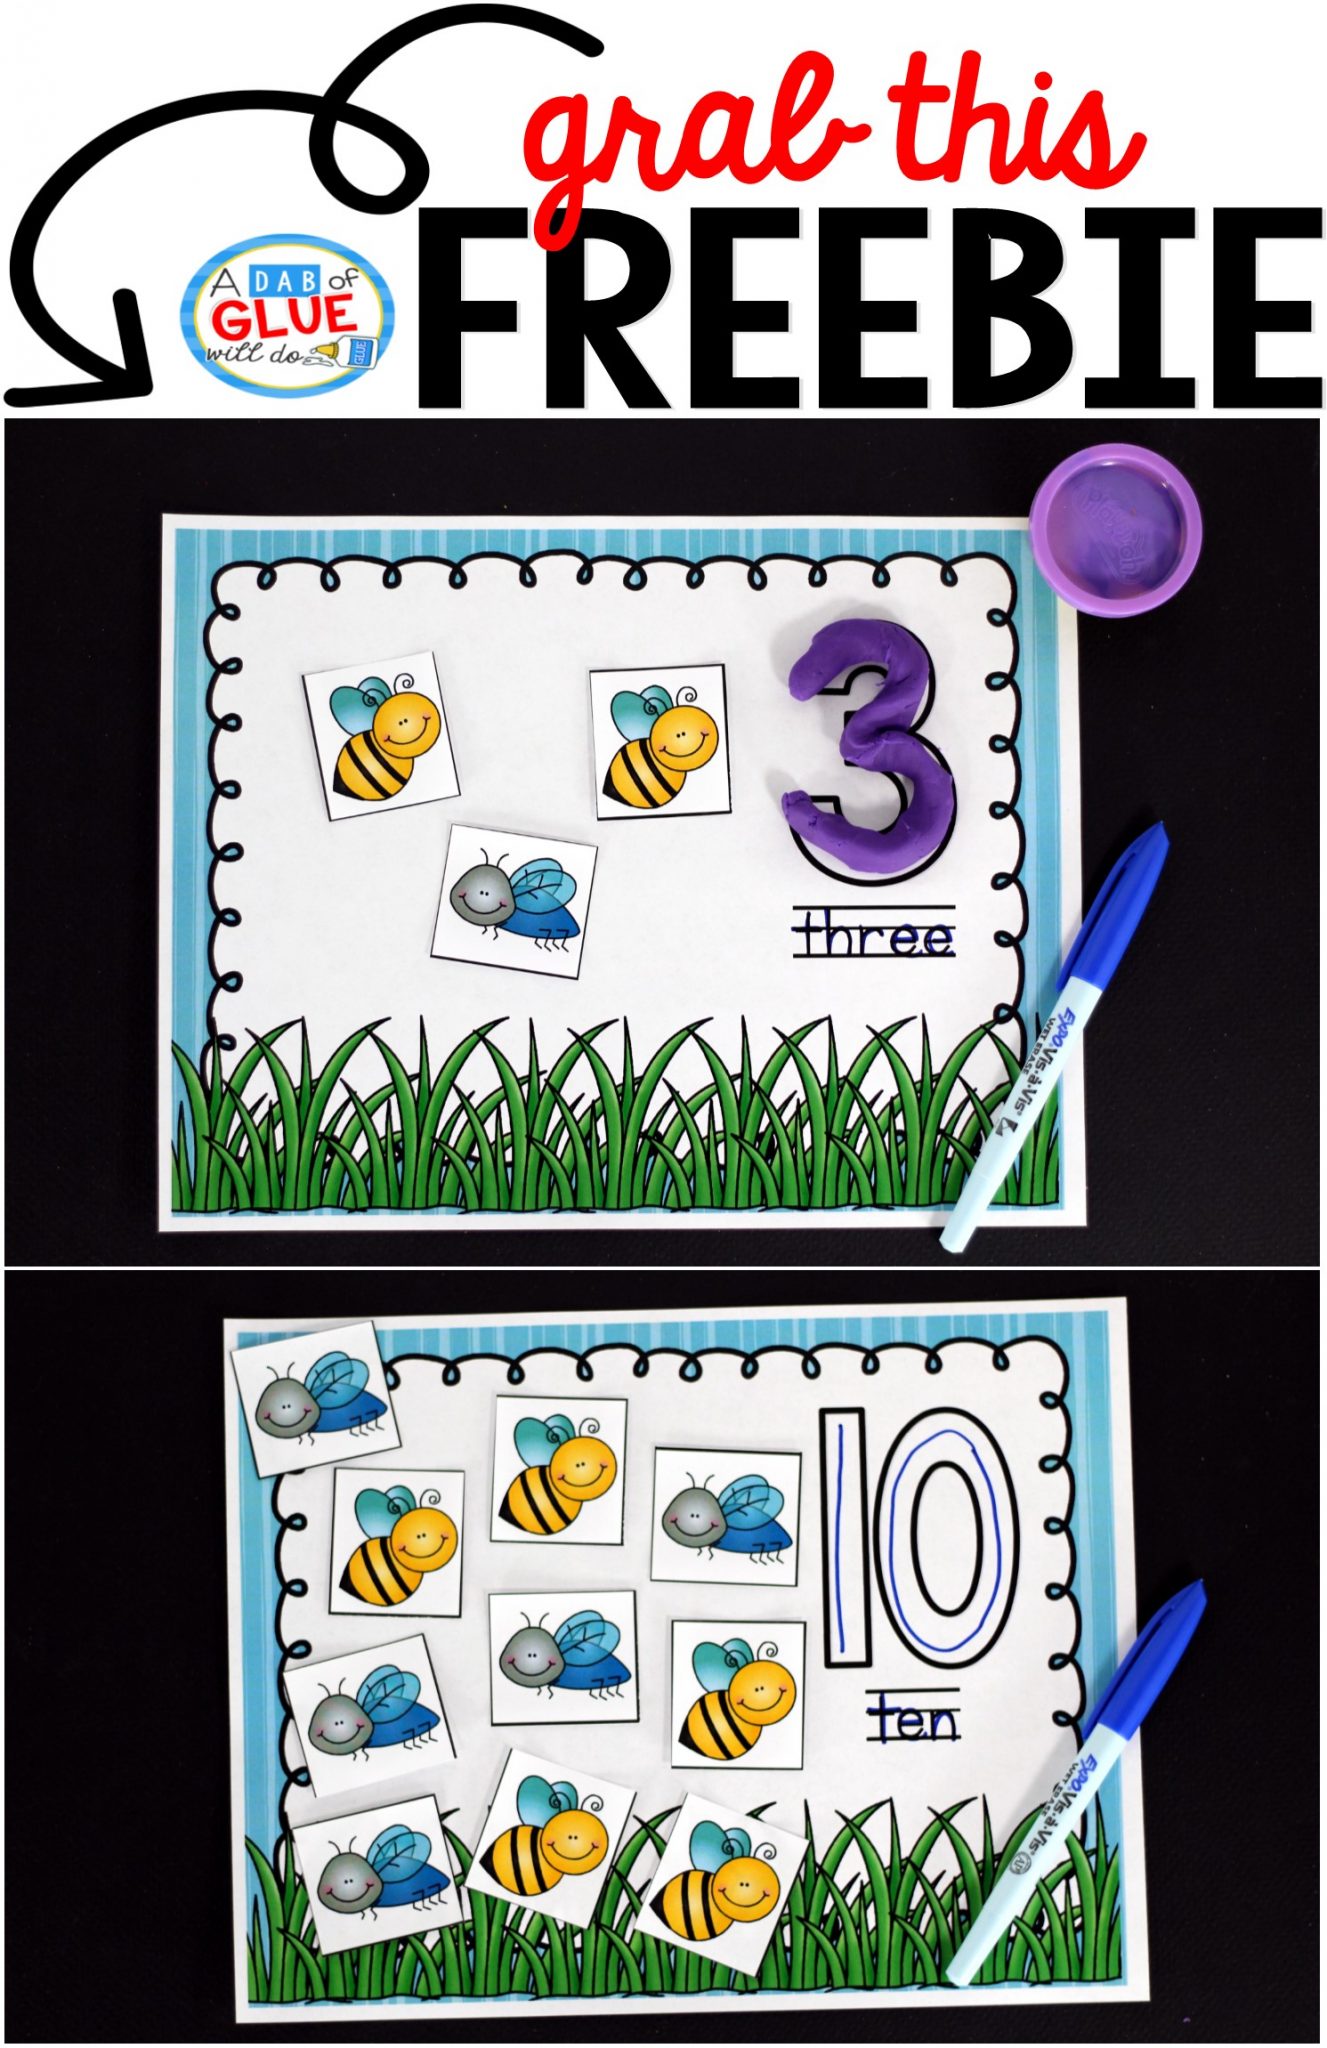 Insect Counting Mats freebie comes with insect counting mats for numbers 1 through 20. In addition there are five pages of insect cards. Insect Counting Mats freebie comes with insect counting mats for numbers 1 through 20. In addition there are five pages of insect cards. 